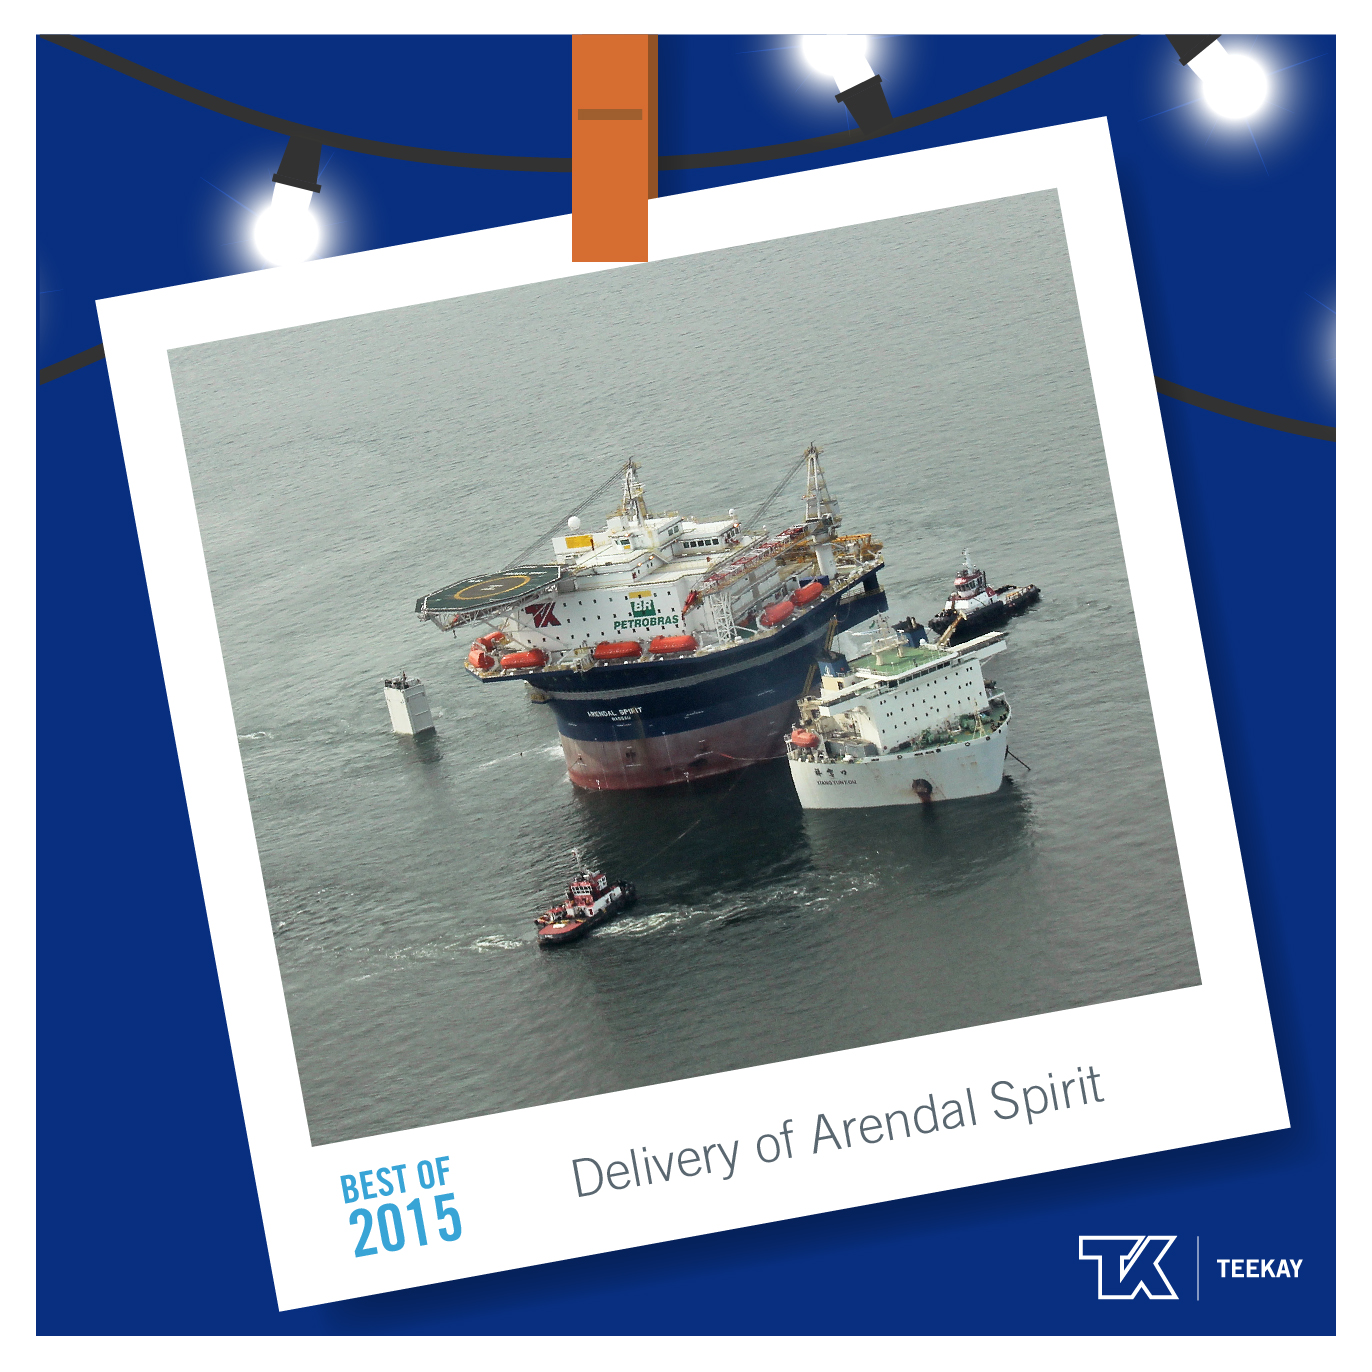 #2 Delivery of Arendal Spirit